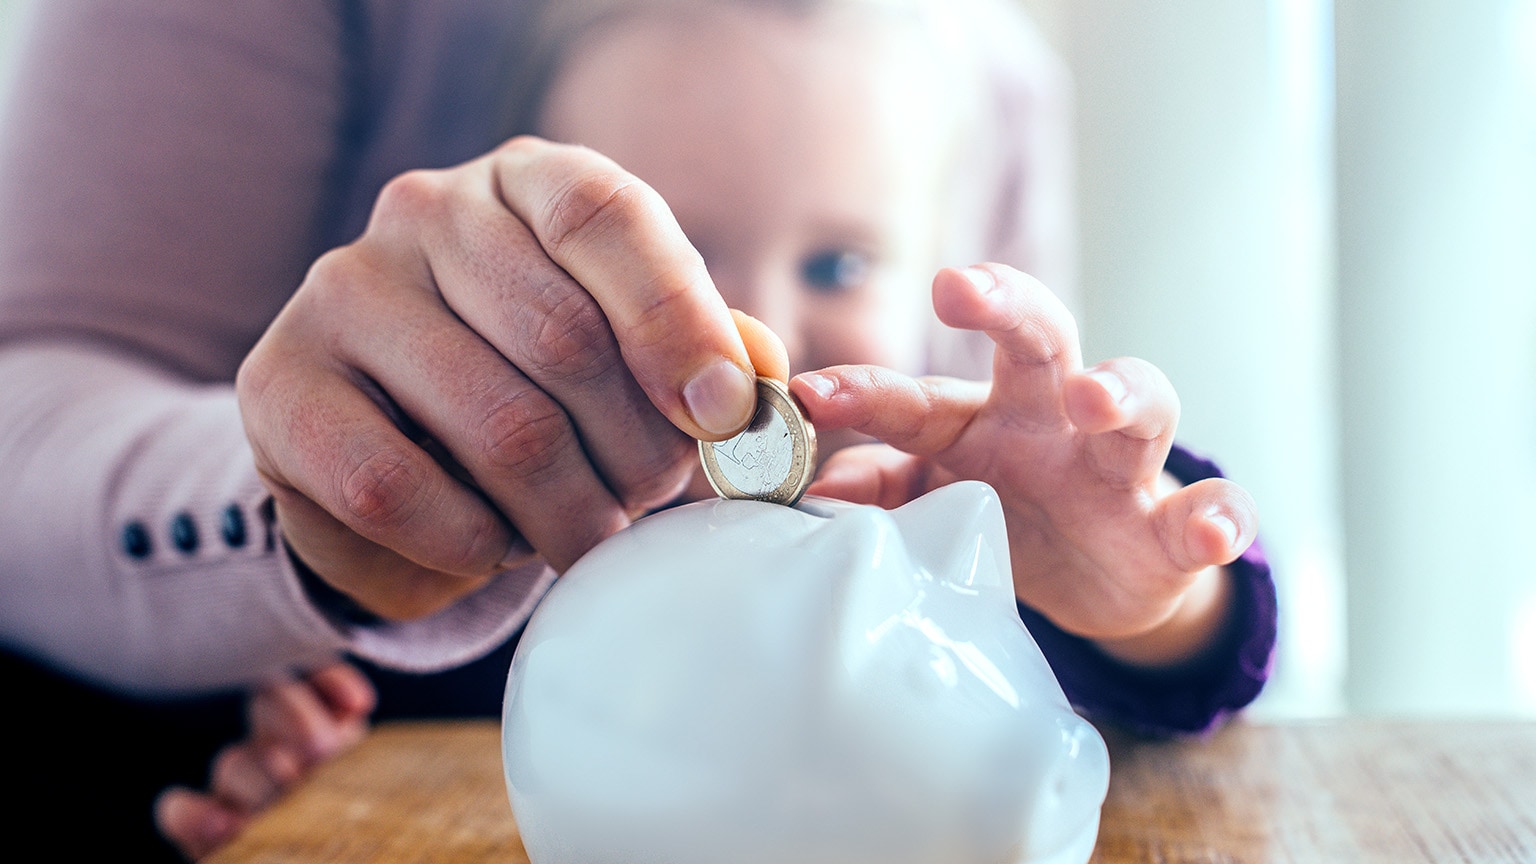 Image of a kid’s and adult’s hands putting a coin into a piggy bank.